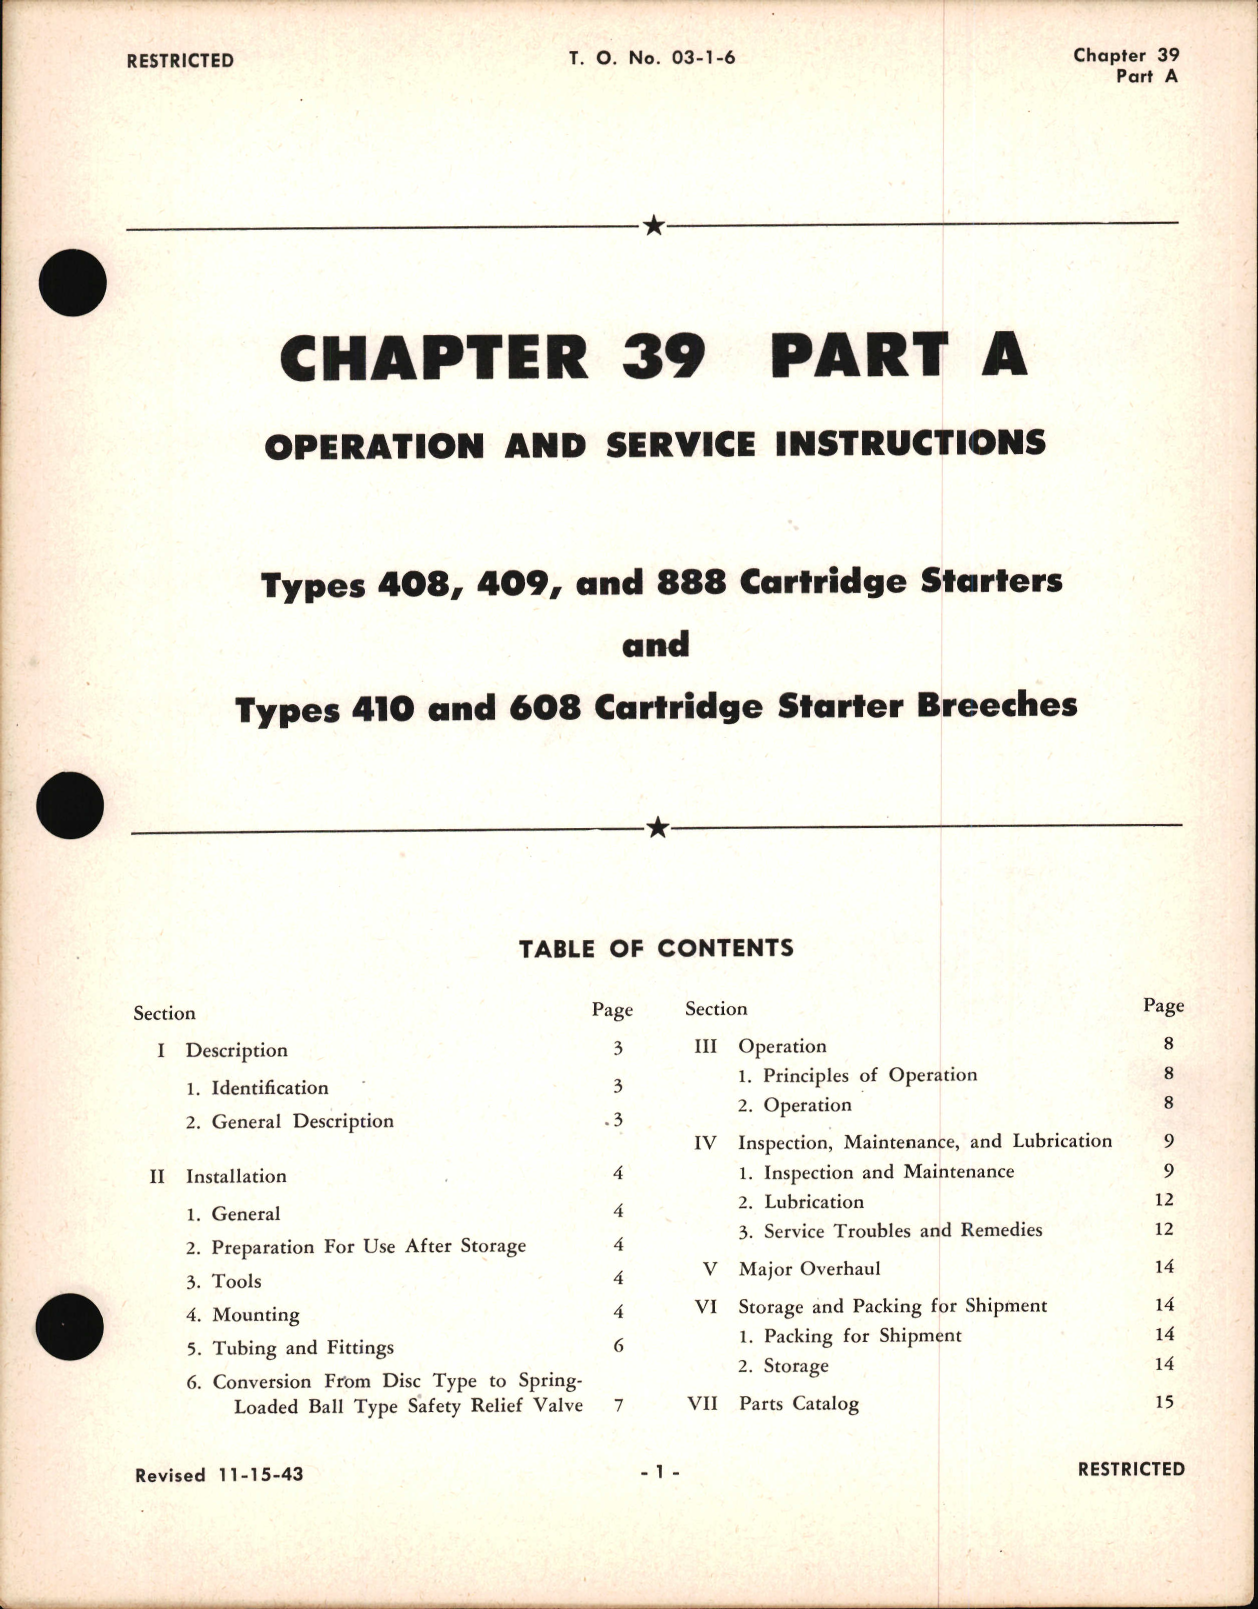 Sample page 1 from AirCorps Library document: Operation and Service Instruction for Cartridge Starters and Starter Breeches, Chapter 39 Part A